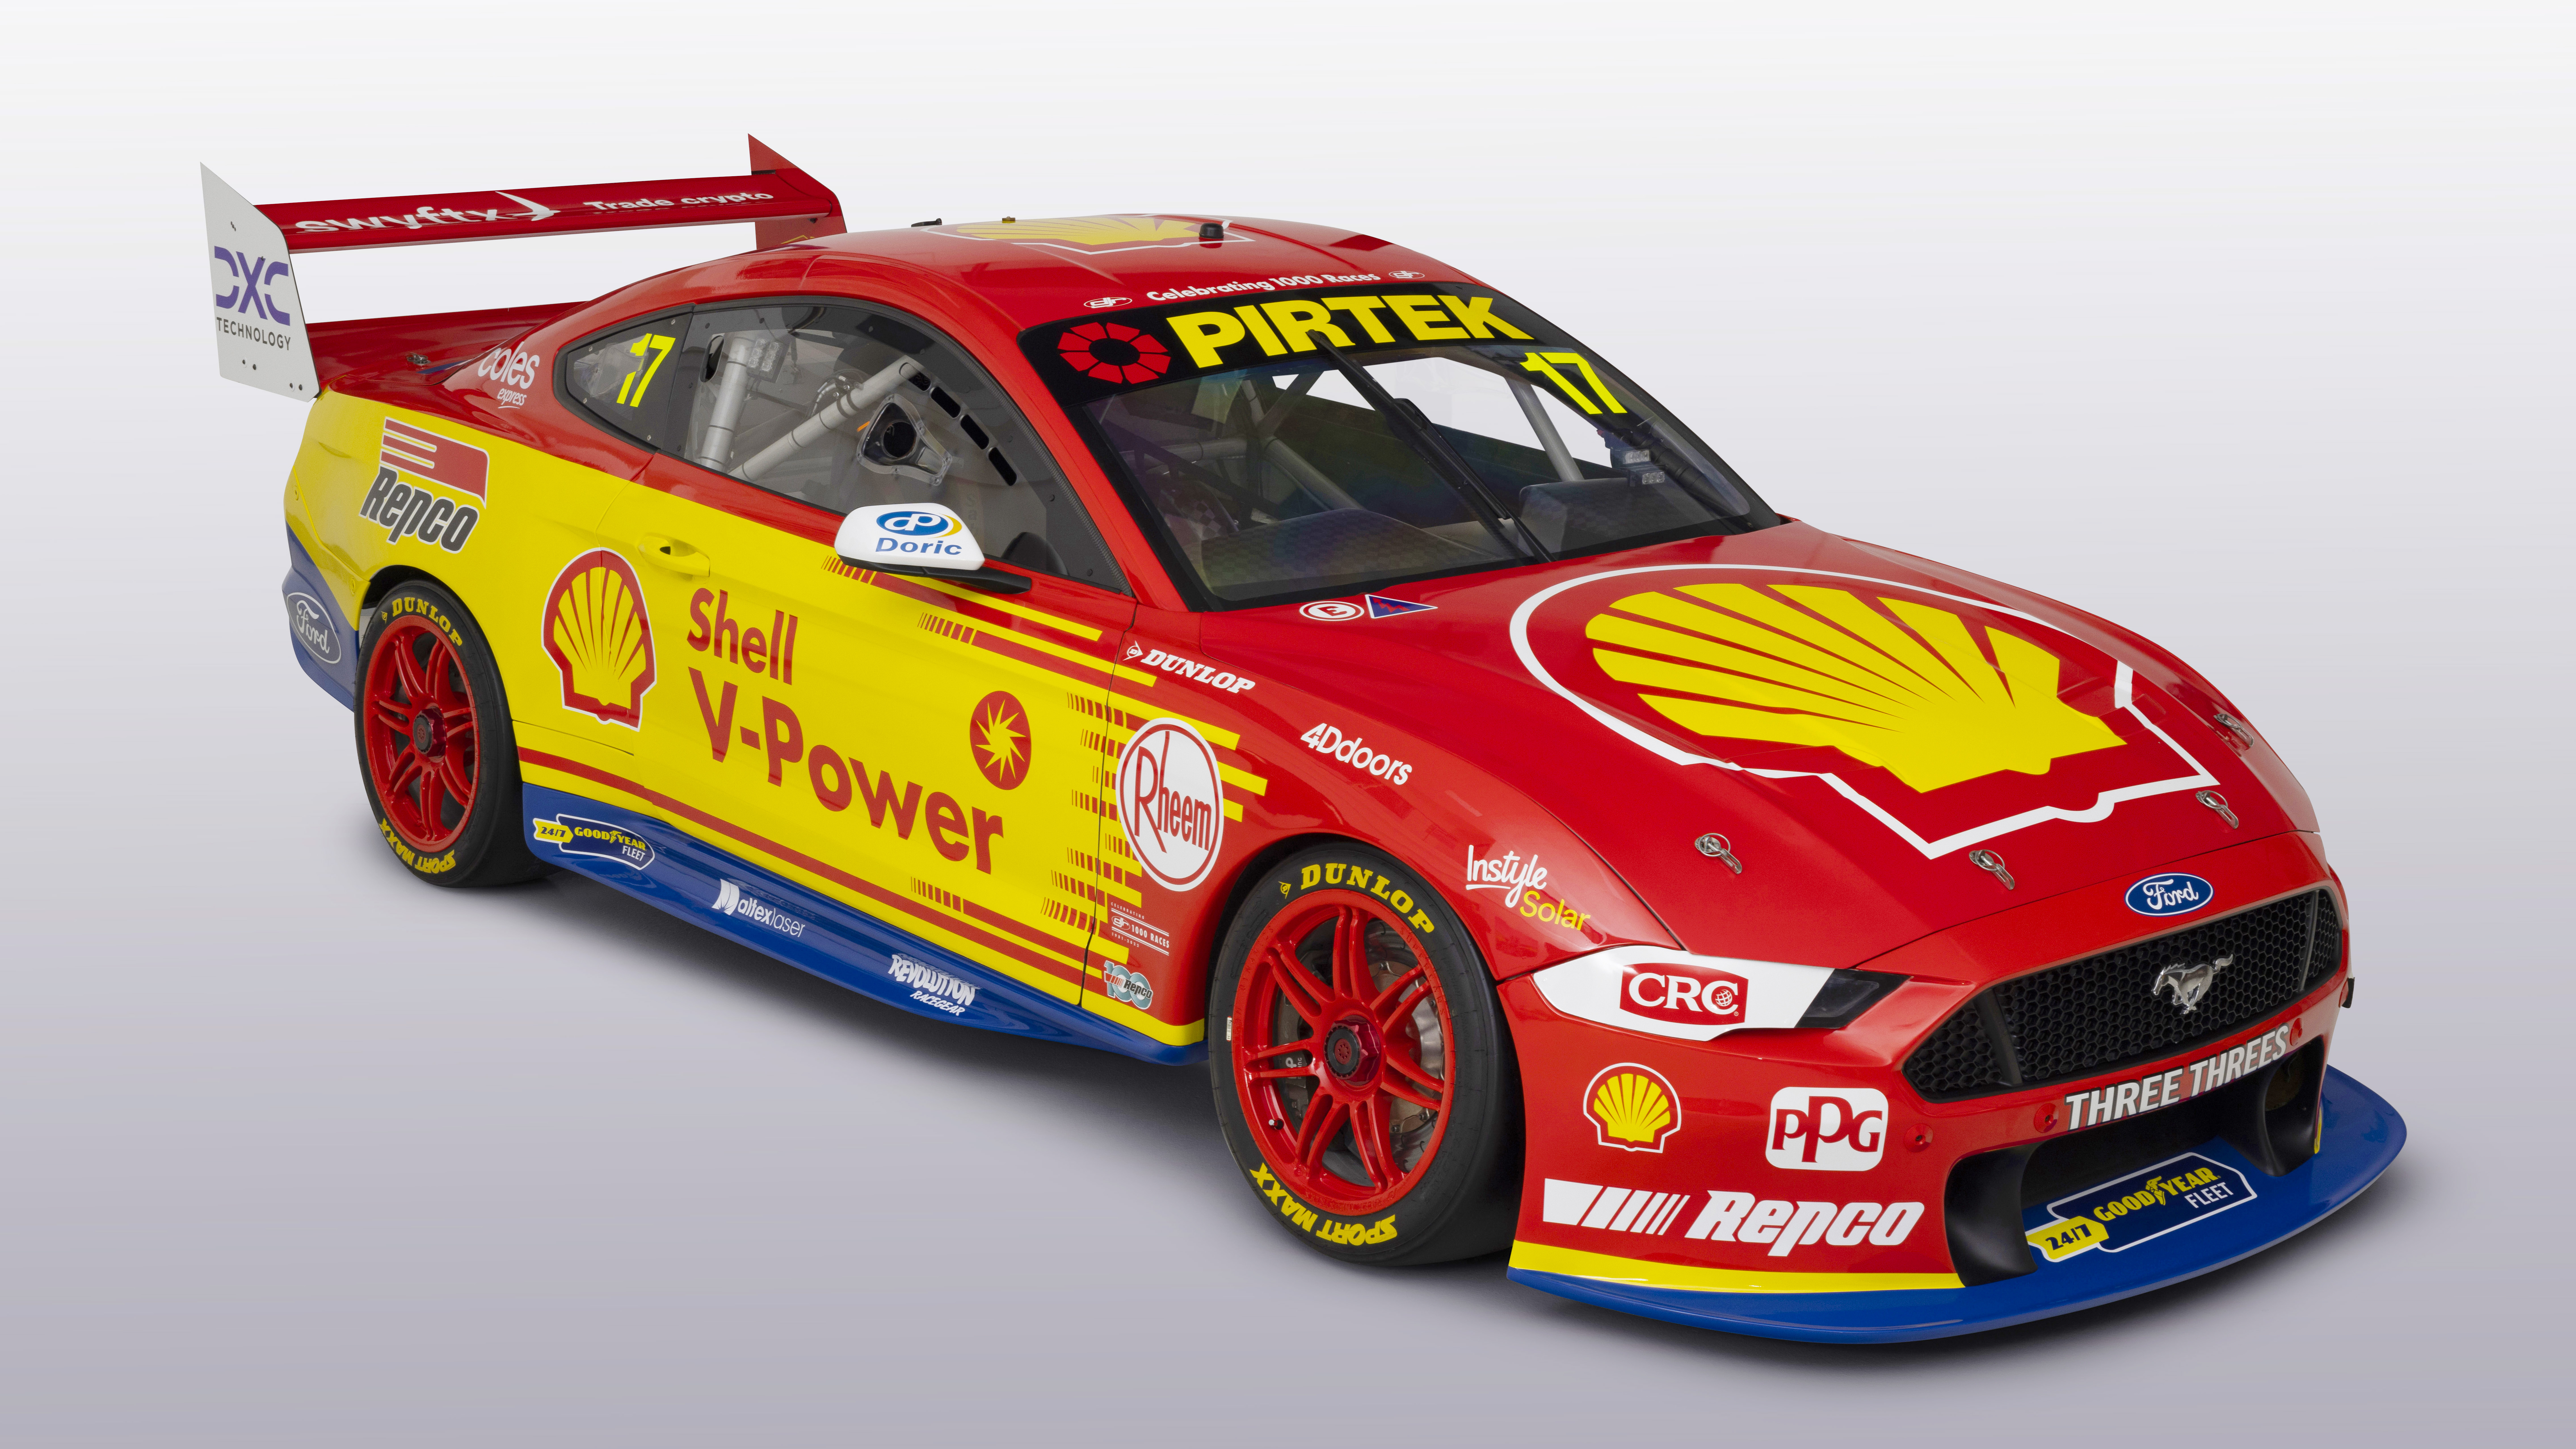 Dick Johnson Racing will run a commemorative livery at the Bathurst 1000, as the team prepares to take part in its 1000th Supercars/Australian Touring Car Championship race.